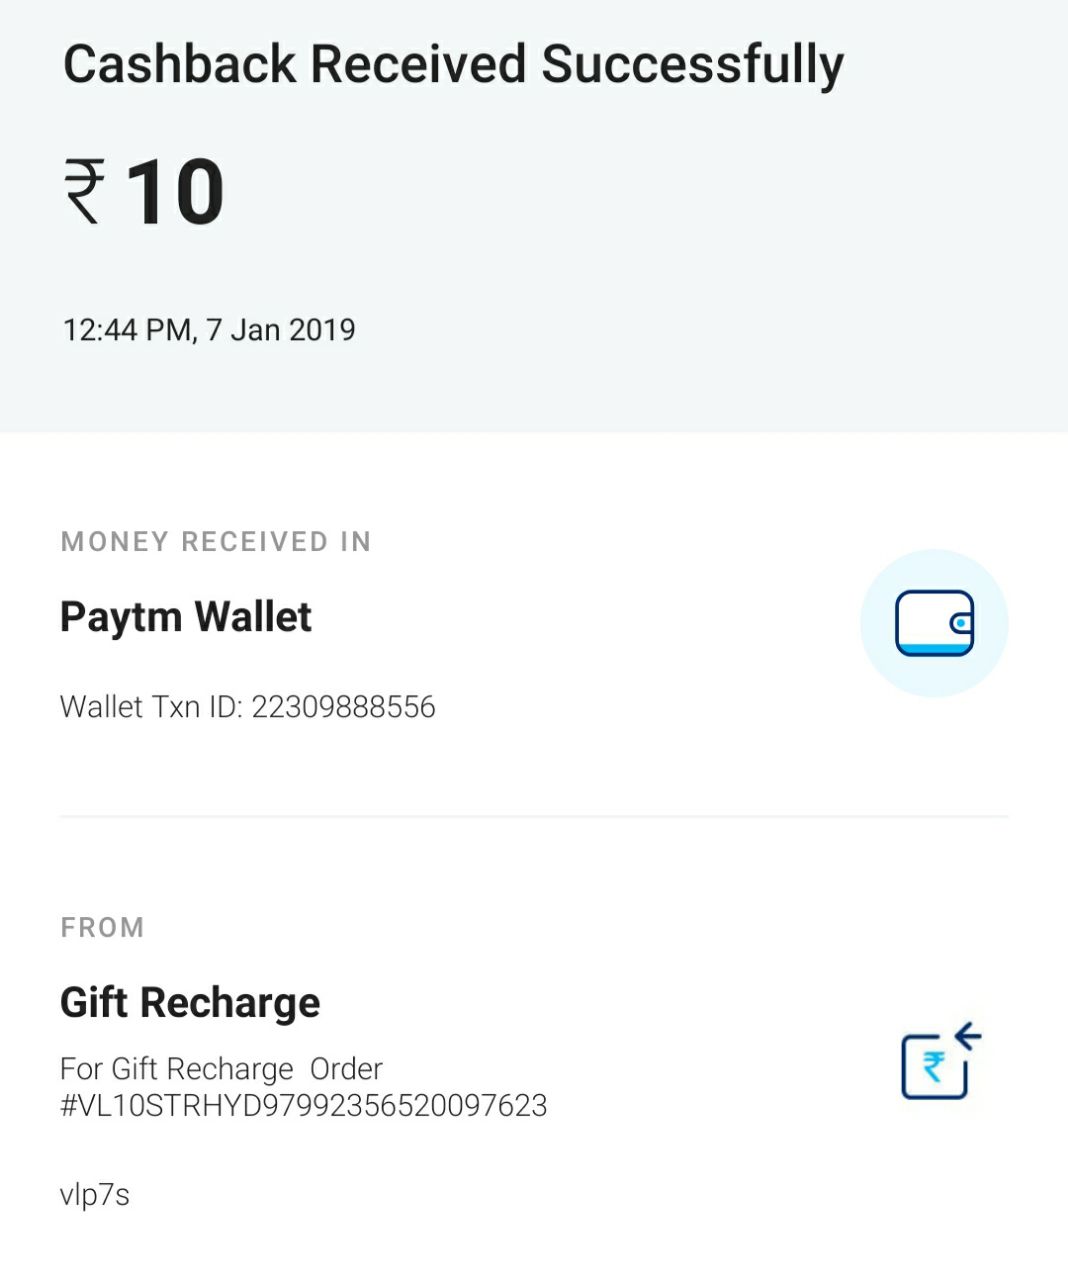 Free Paytm Cash Loot - Get Free Rs.10 Paytm Cash By Giving MissCall